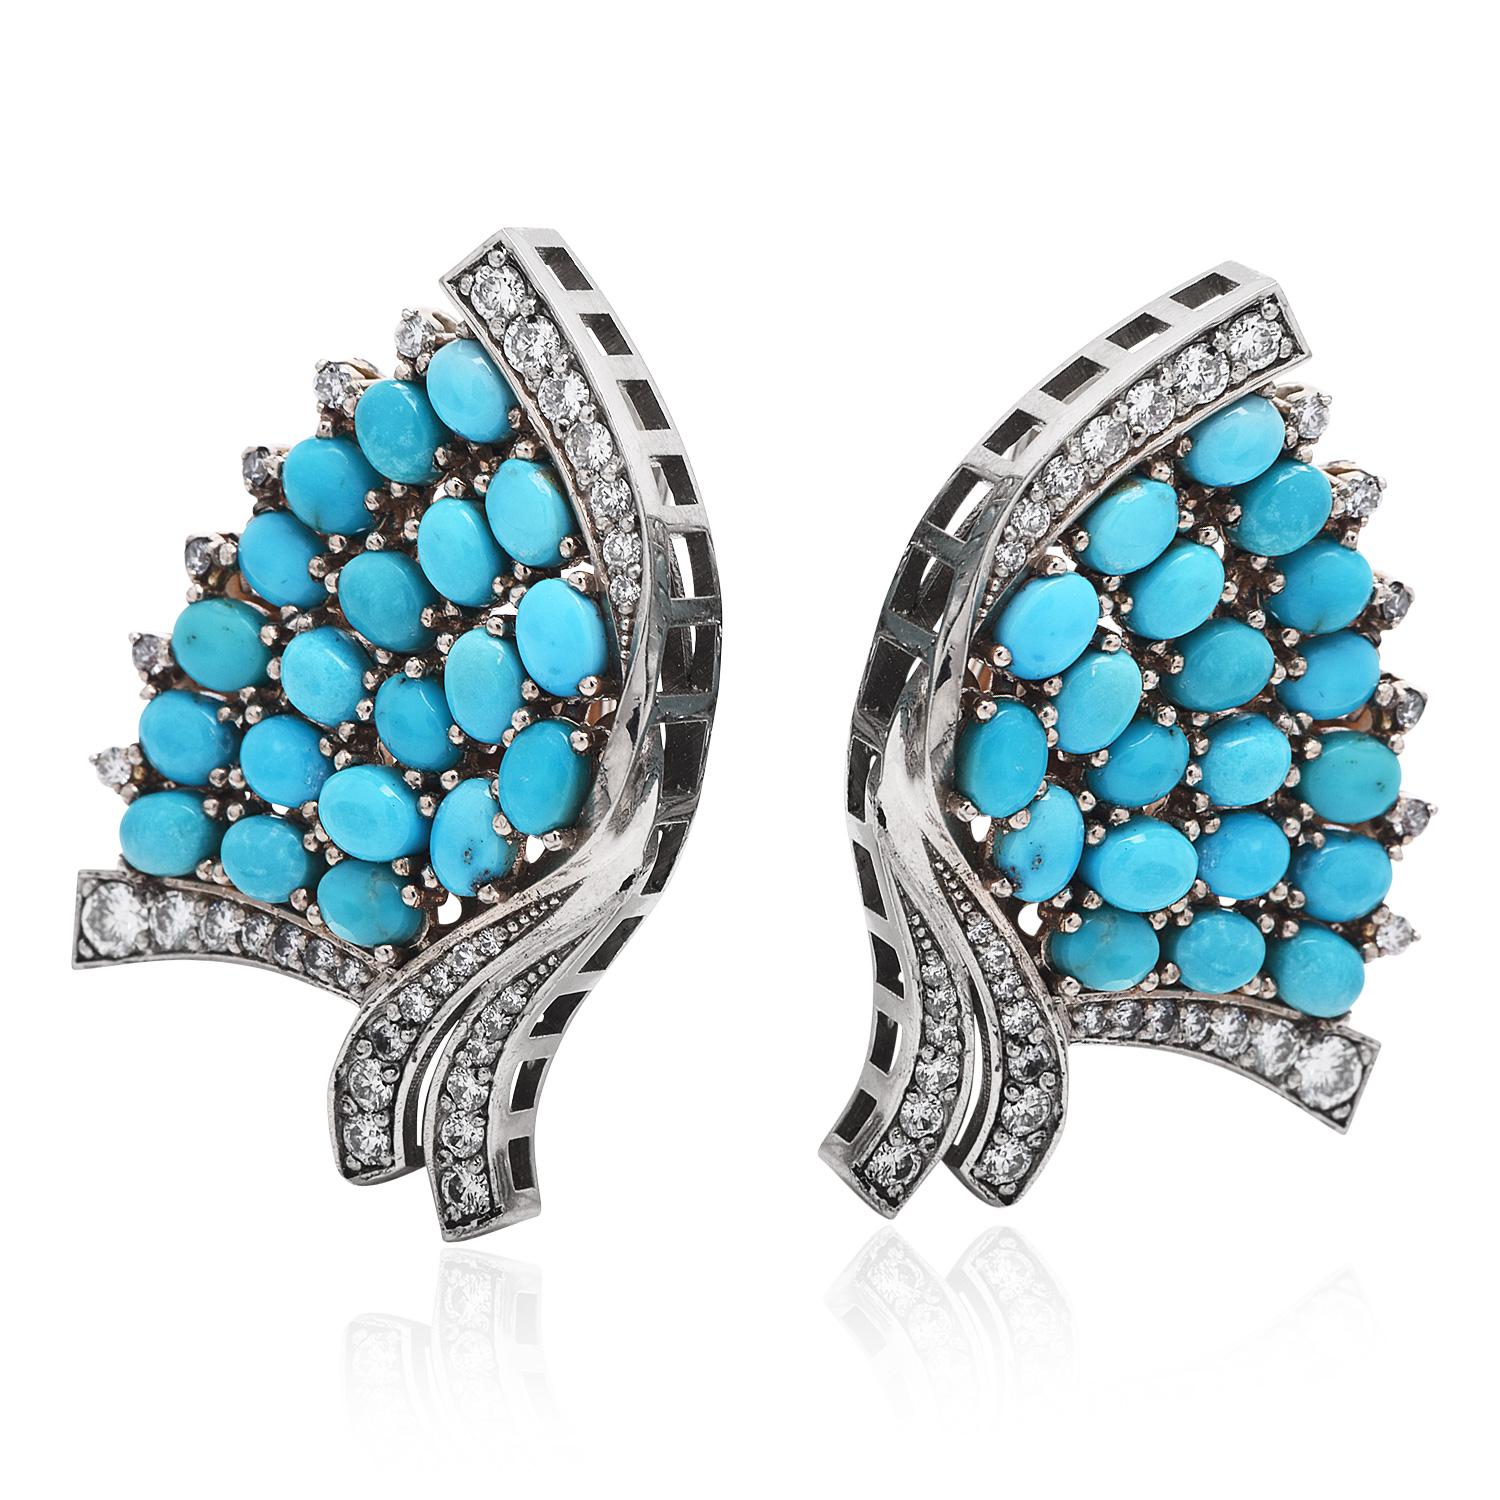 This Exquisite Vintage Flutter & Fan Design turquoise earrings with Clip On Earrings, 

Crafted in 14K White Gold.

Complimenting the center cluster, there are (40) Oval cabochon cut, genuine Turquoise, pave prong sets, weighing in a total of